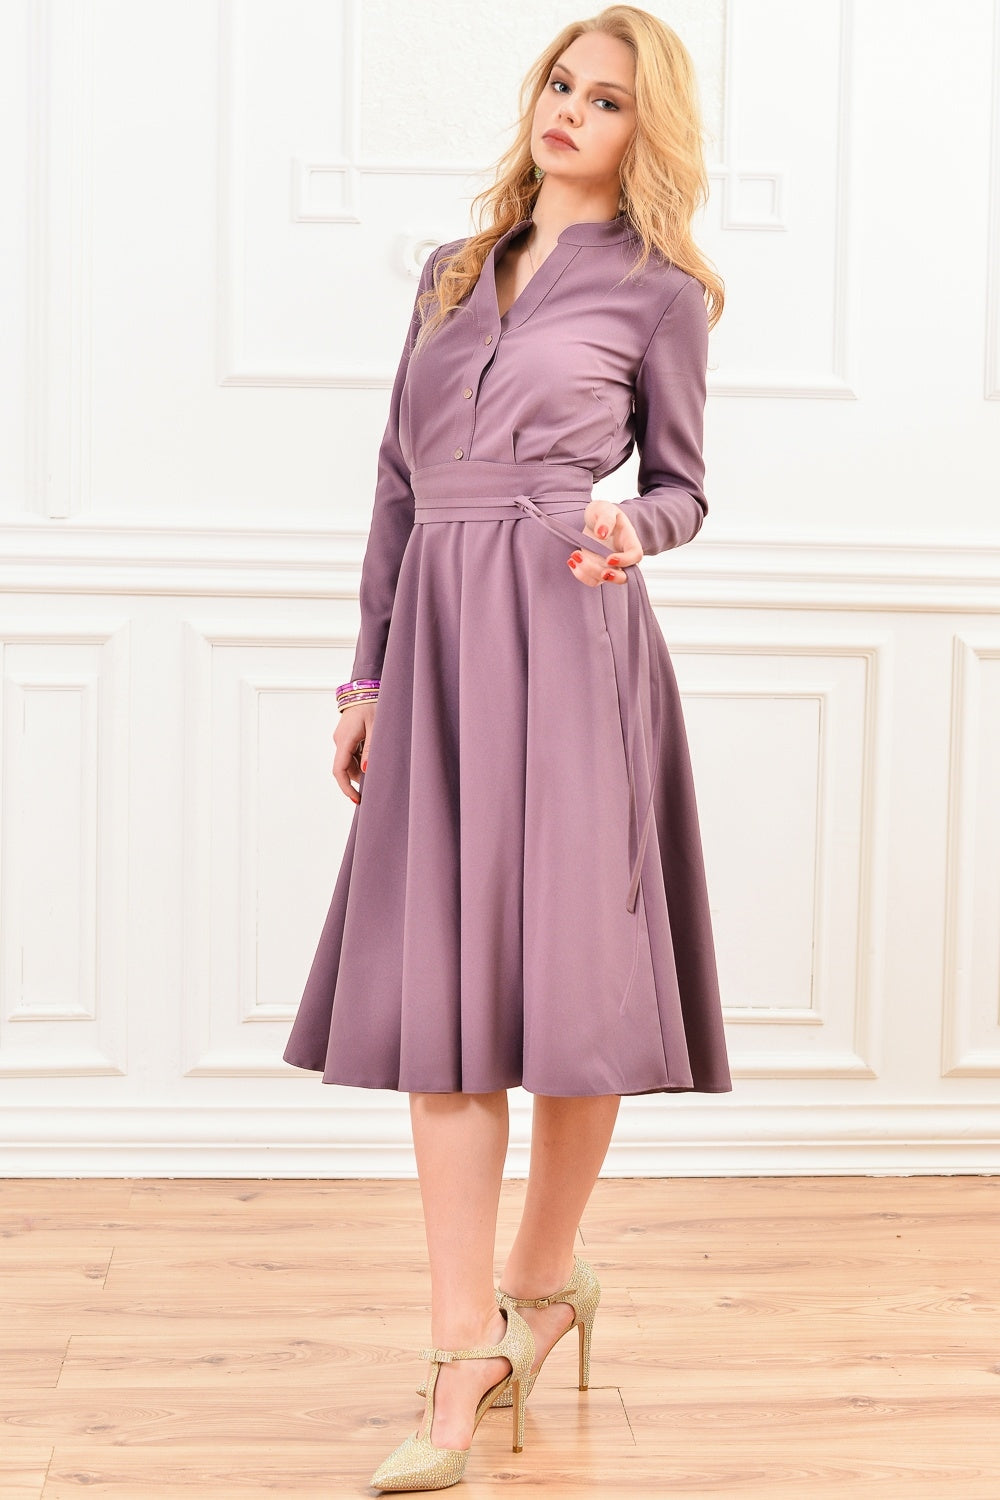 Light purple dress with stand up collar and front buttons